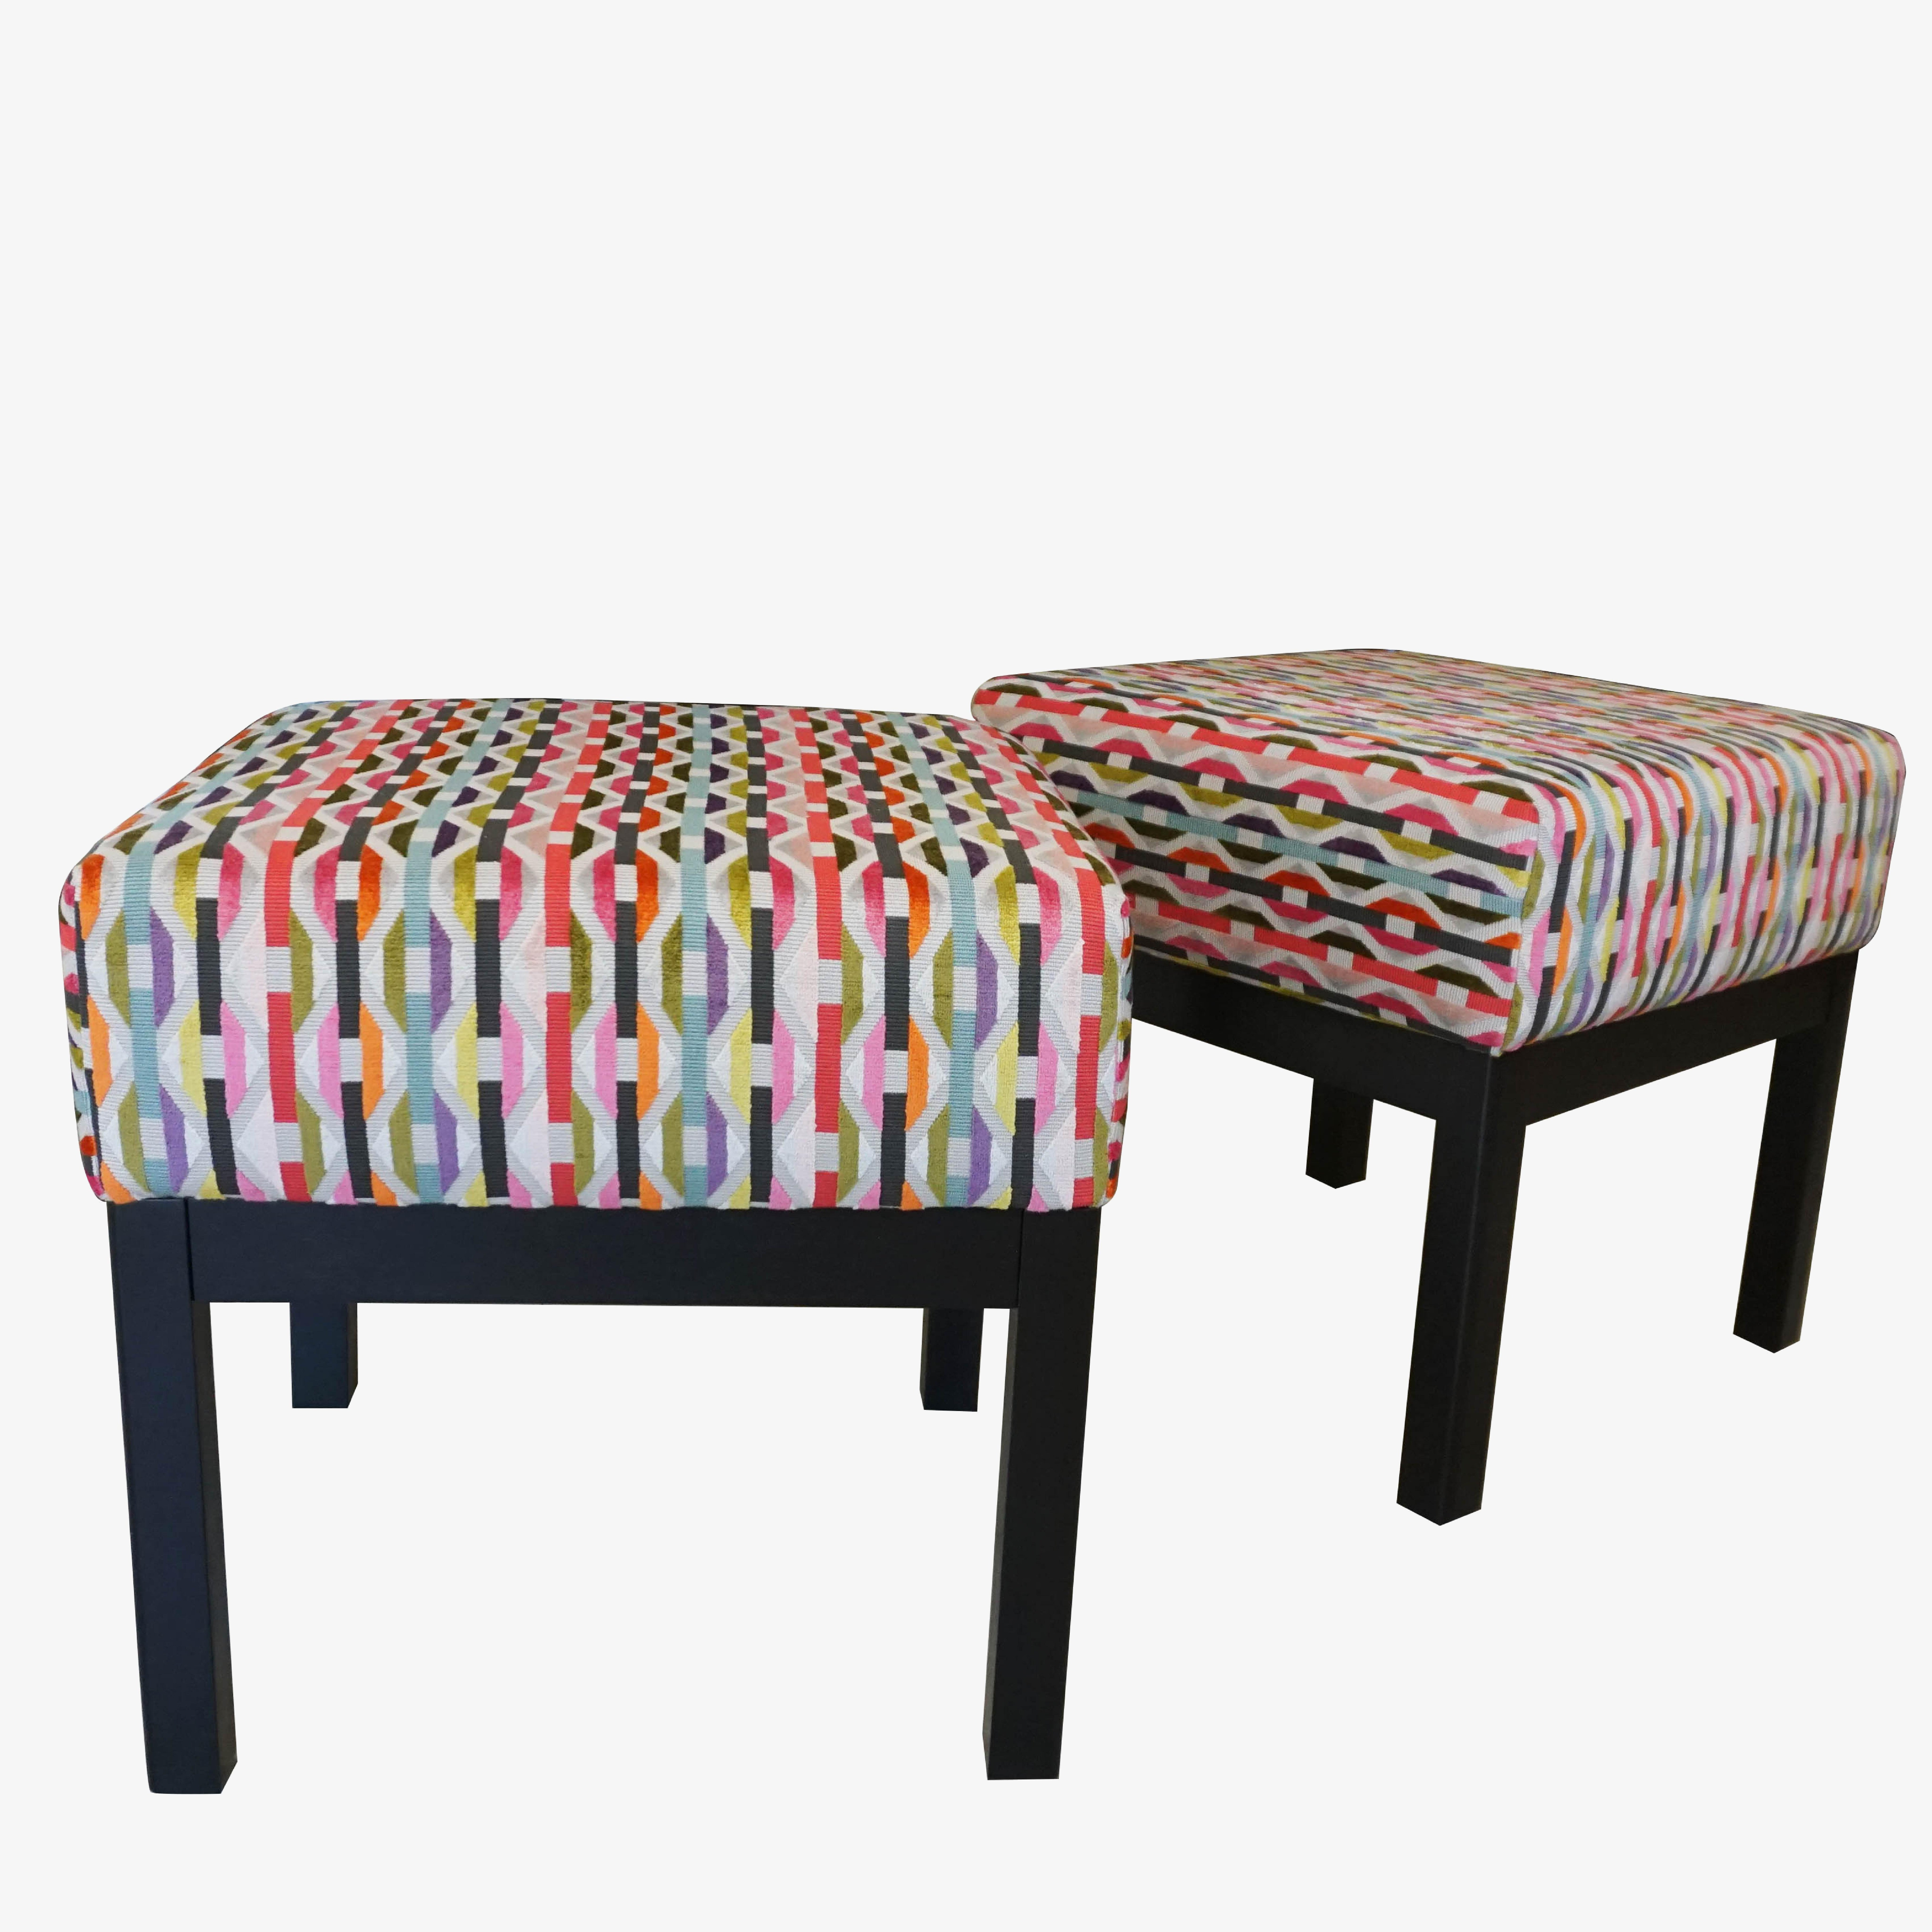 A pair of classic square low stools with cushions upholstered in 'Onetti Chilli' fabric from Romo's Habanera Collection. This colorful fire retardant weaves and velvets is inspired by intricate fretwork, interlocking shapes, combined with chevrons